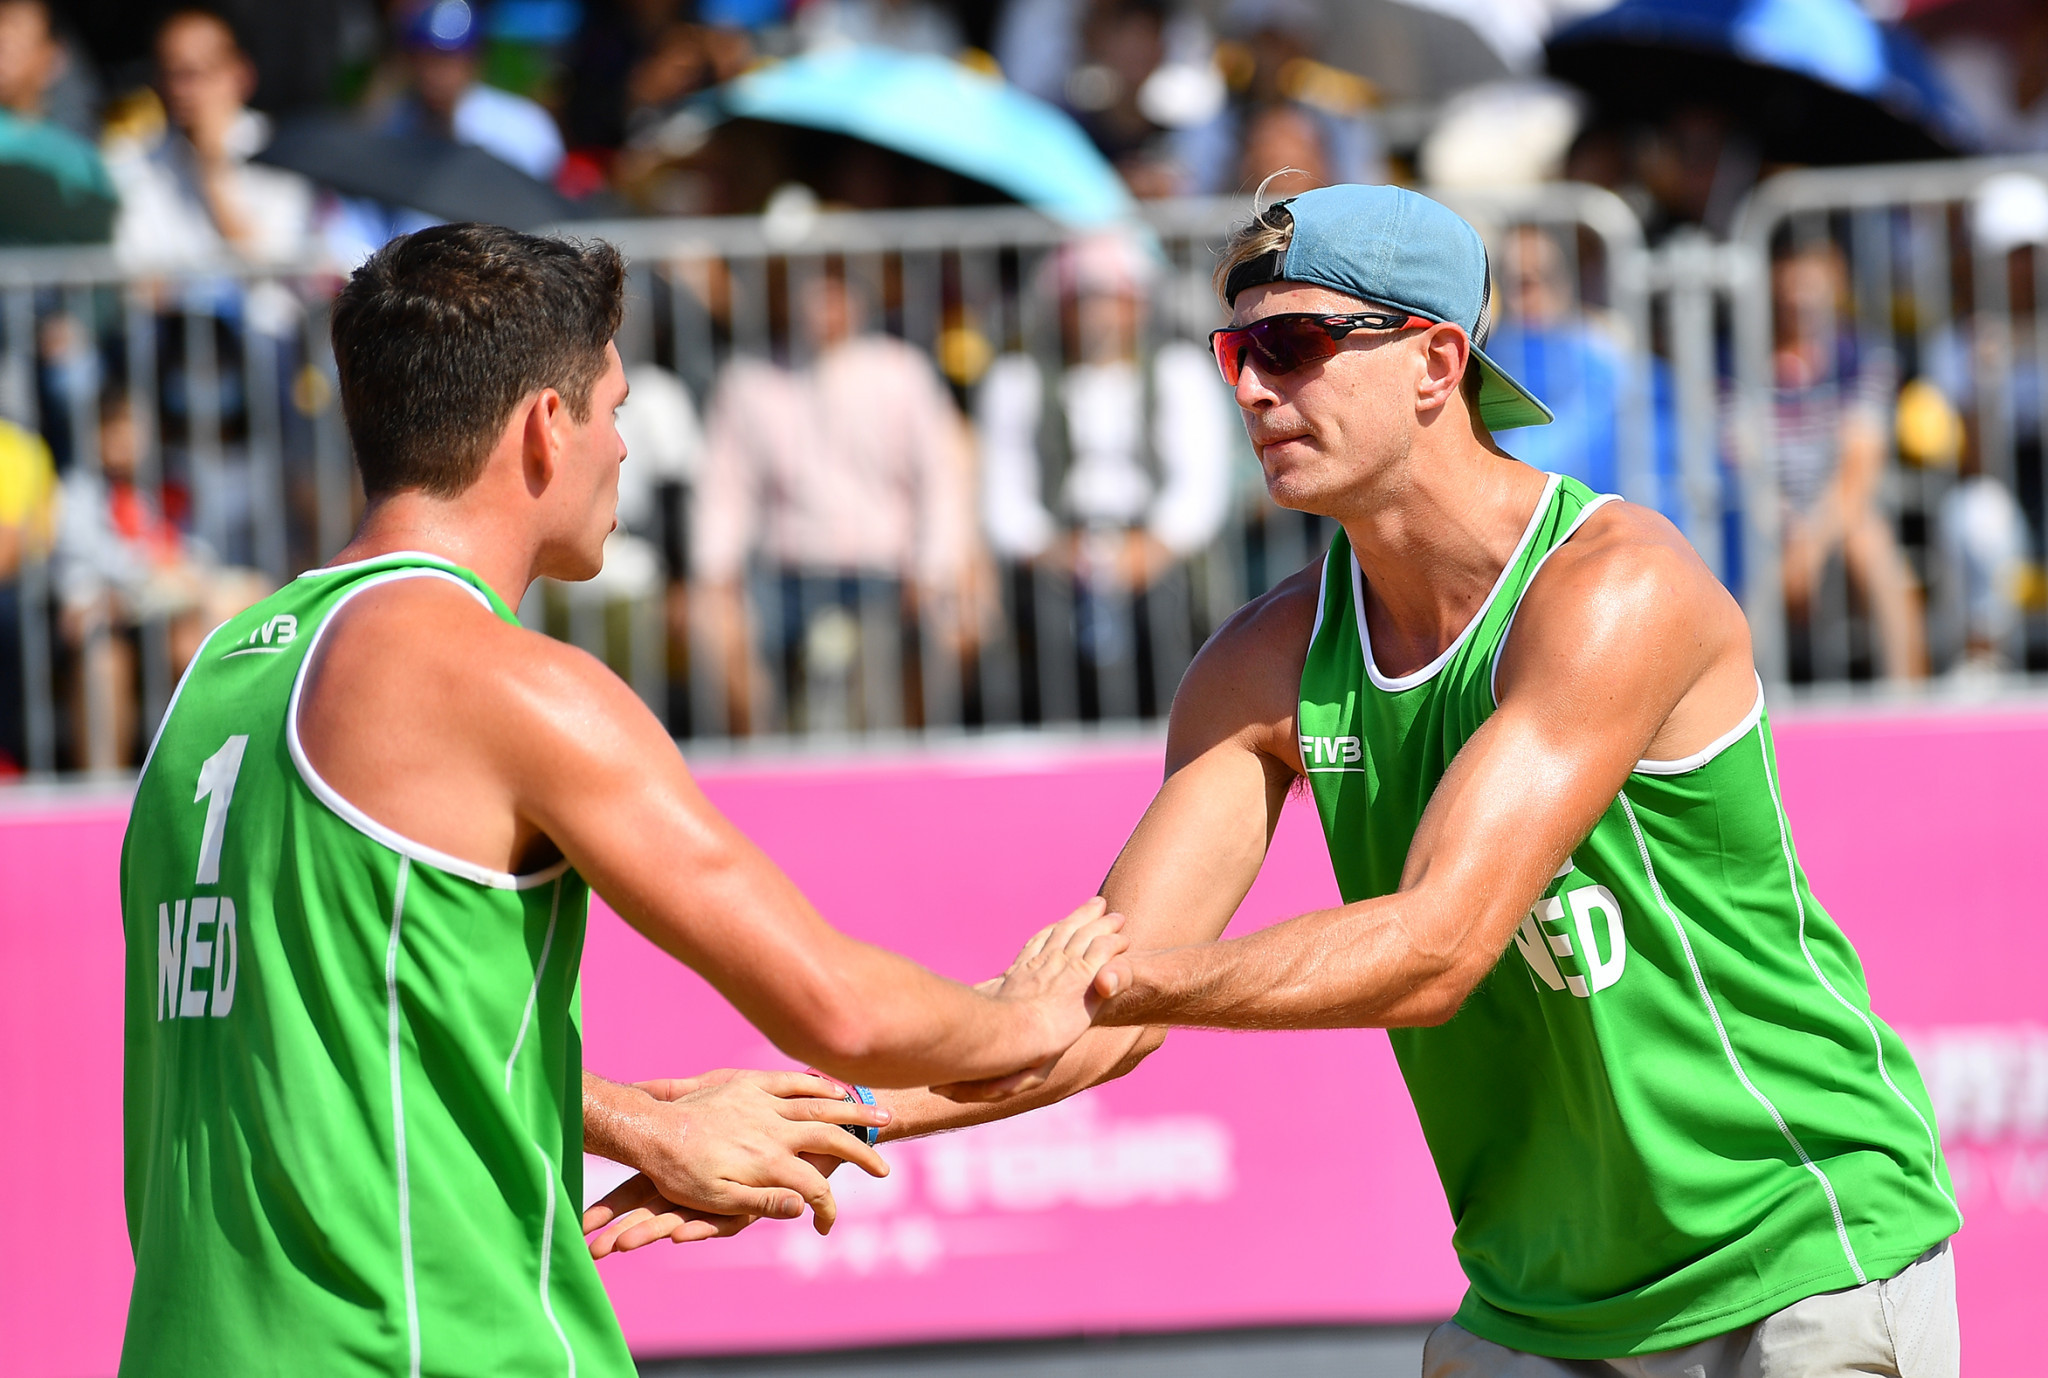 Dutch qualifiers Dirk Boehle and Steven Van de Velde caused a major upset in China today ©FIVB